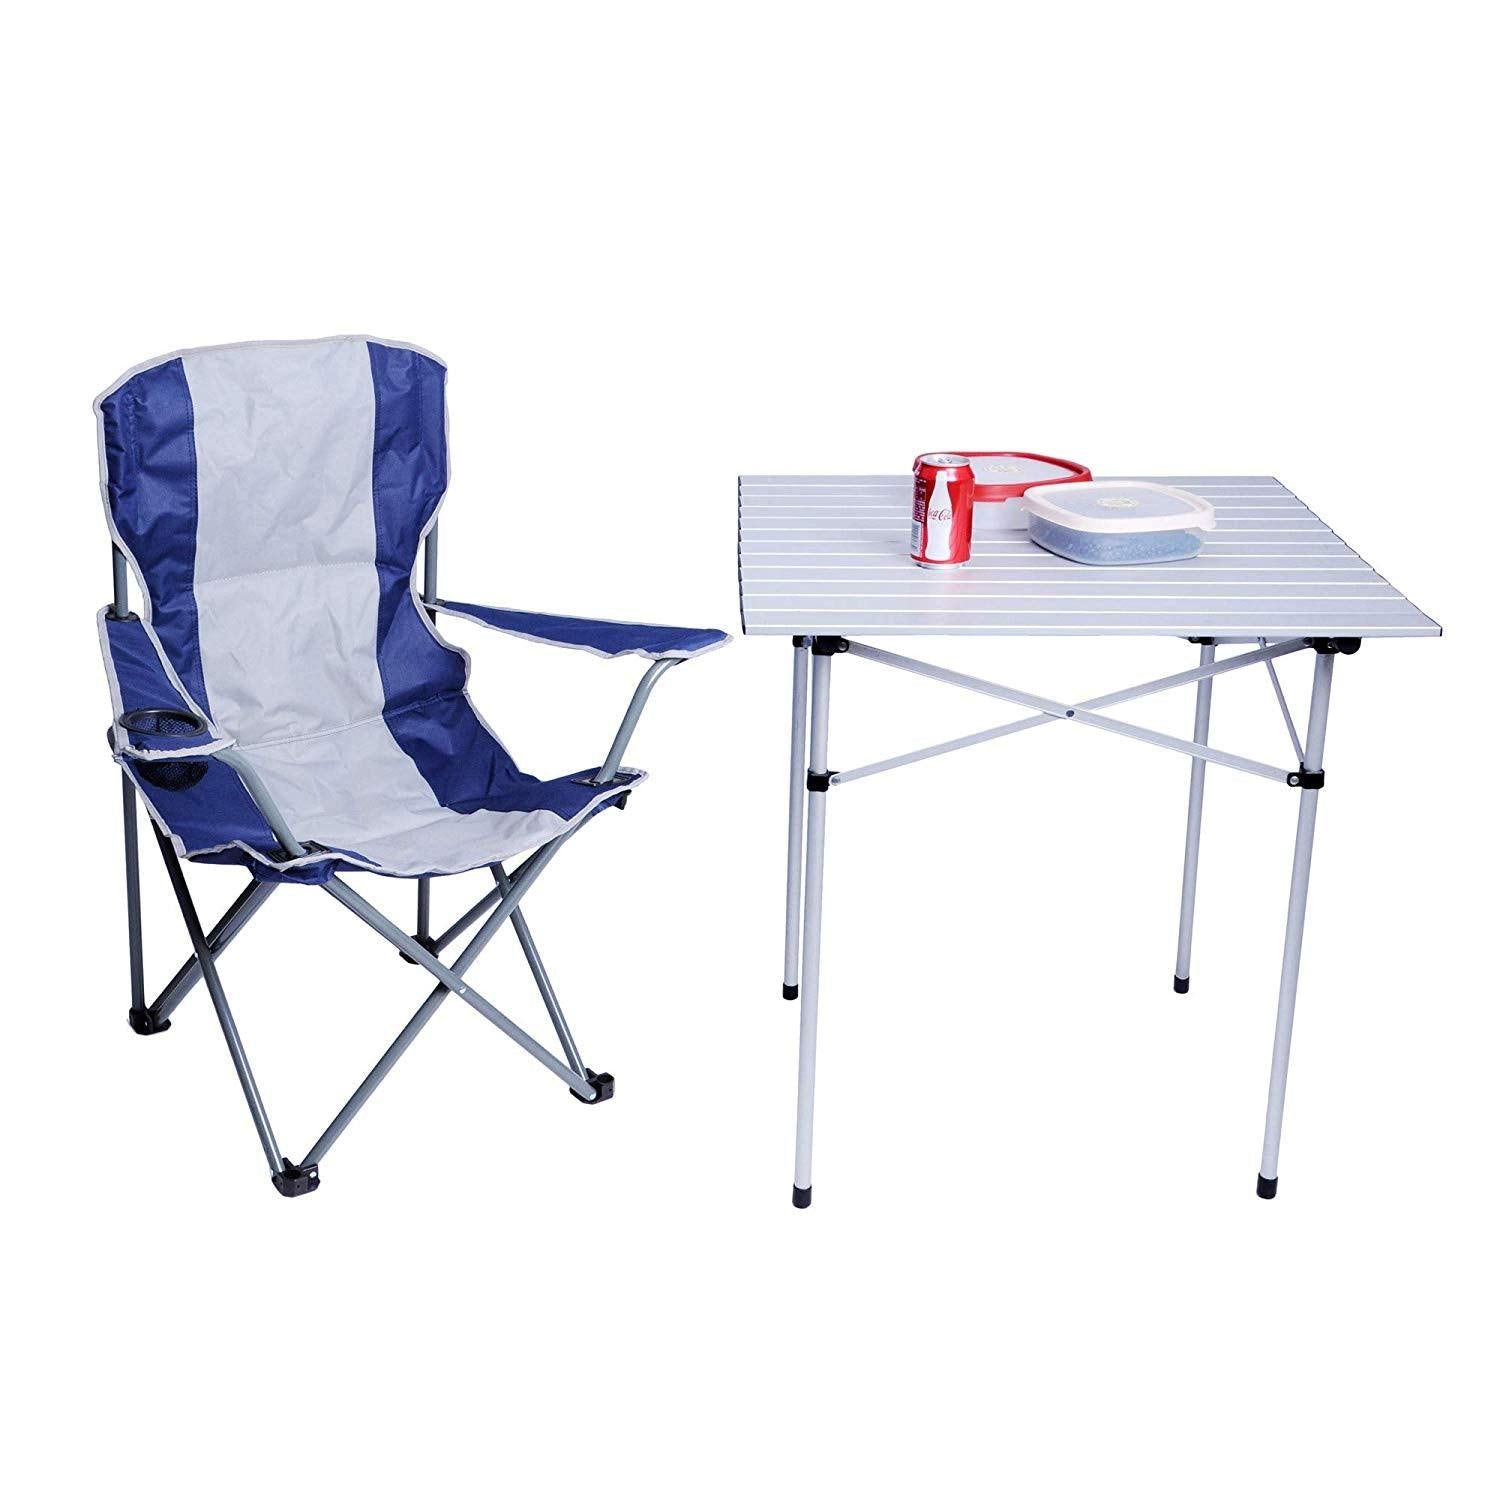 Bosonshop Canopy Camping Chair Folding Durable Outdoor Patio Seat with Cup Holder